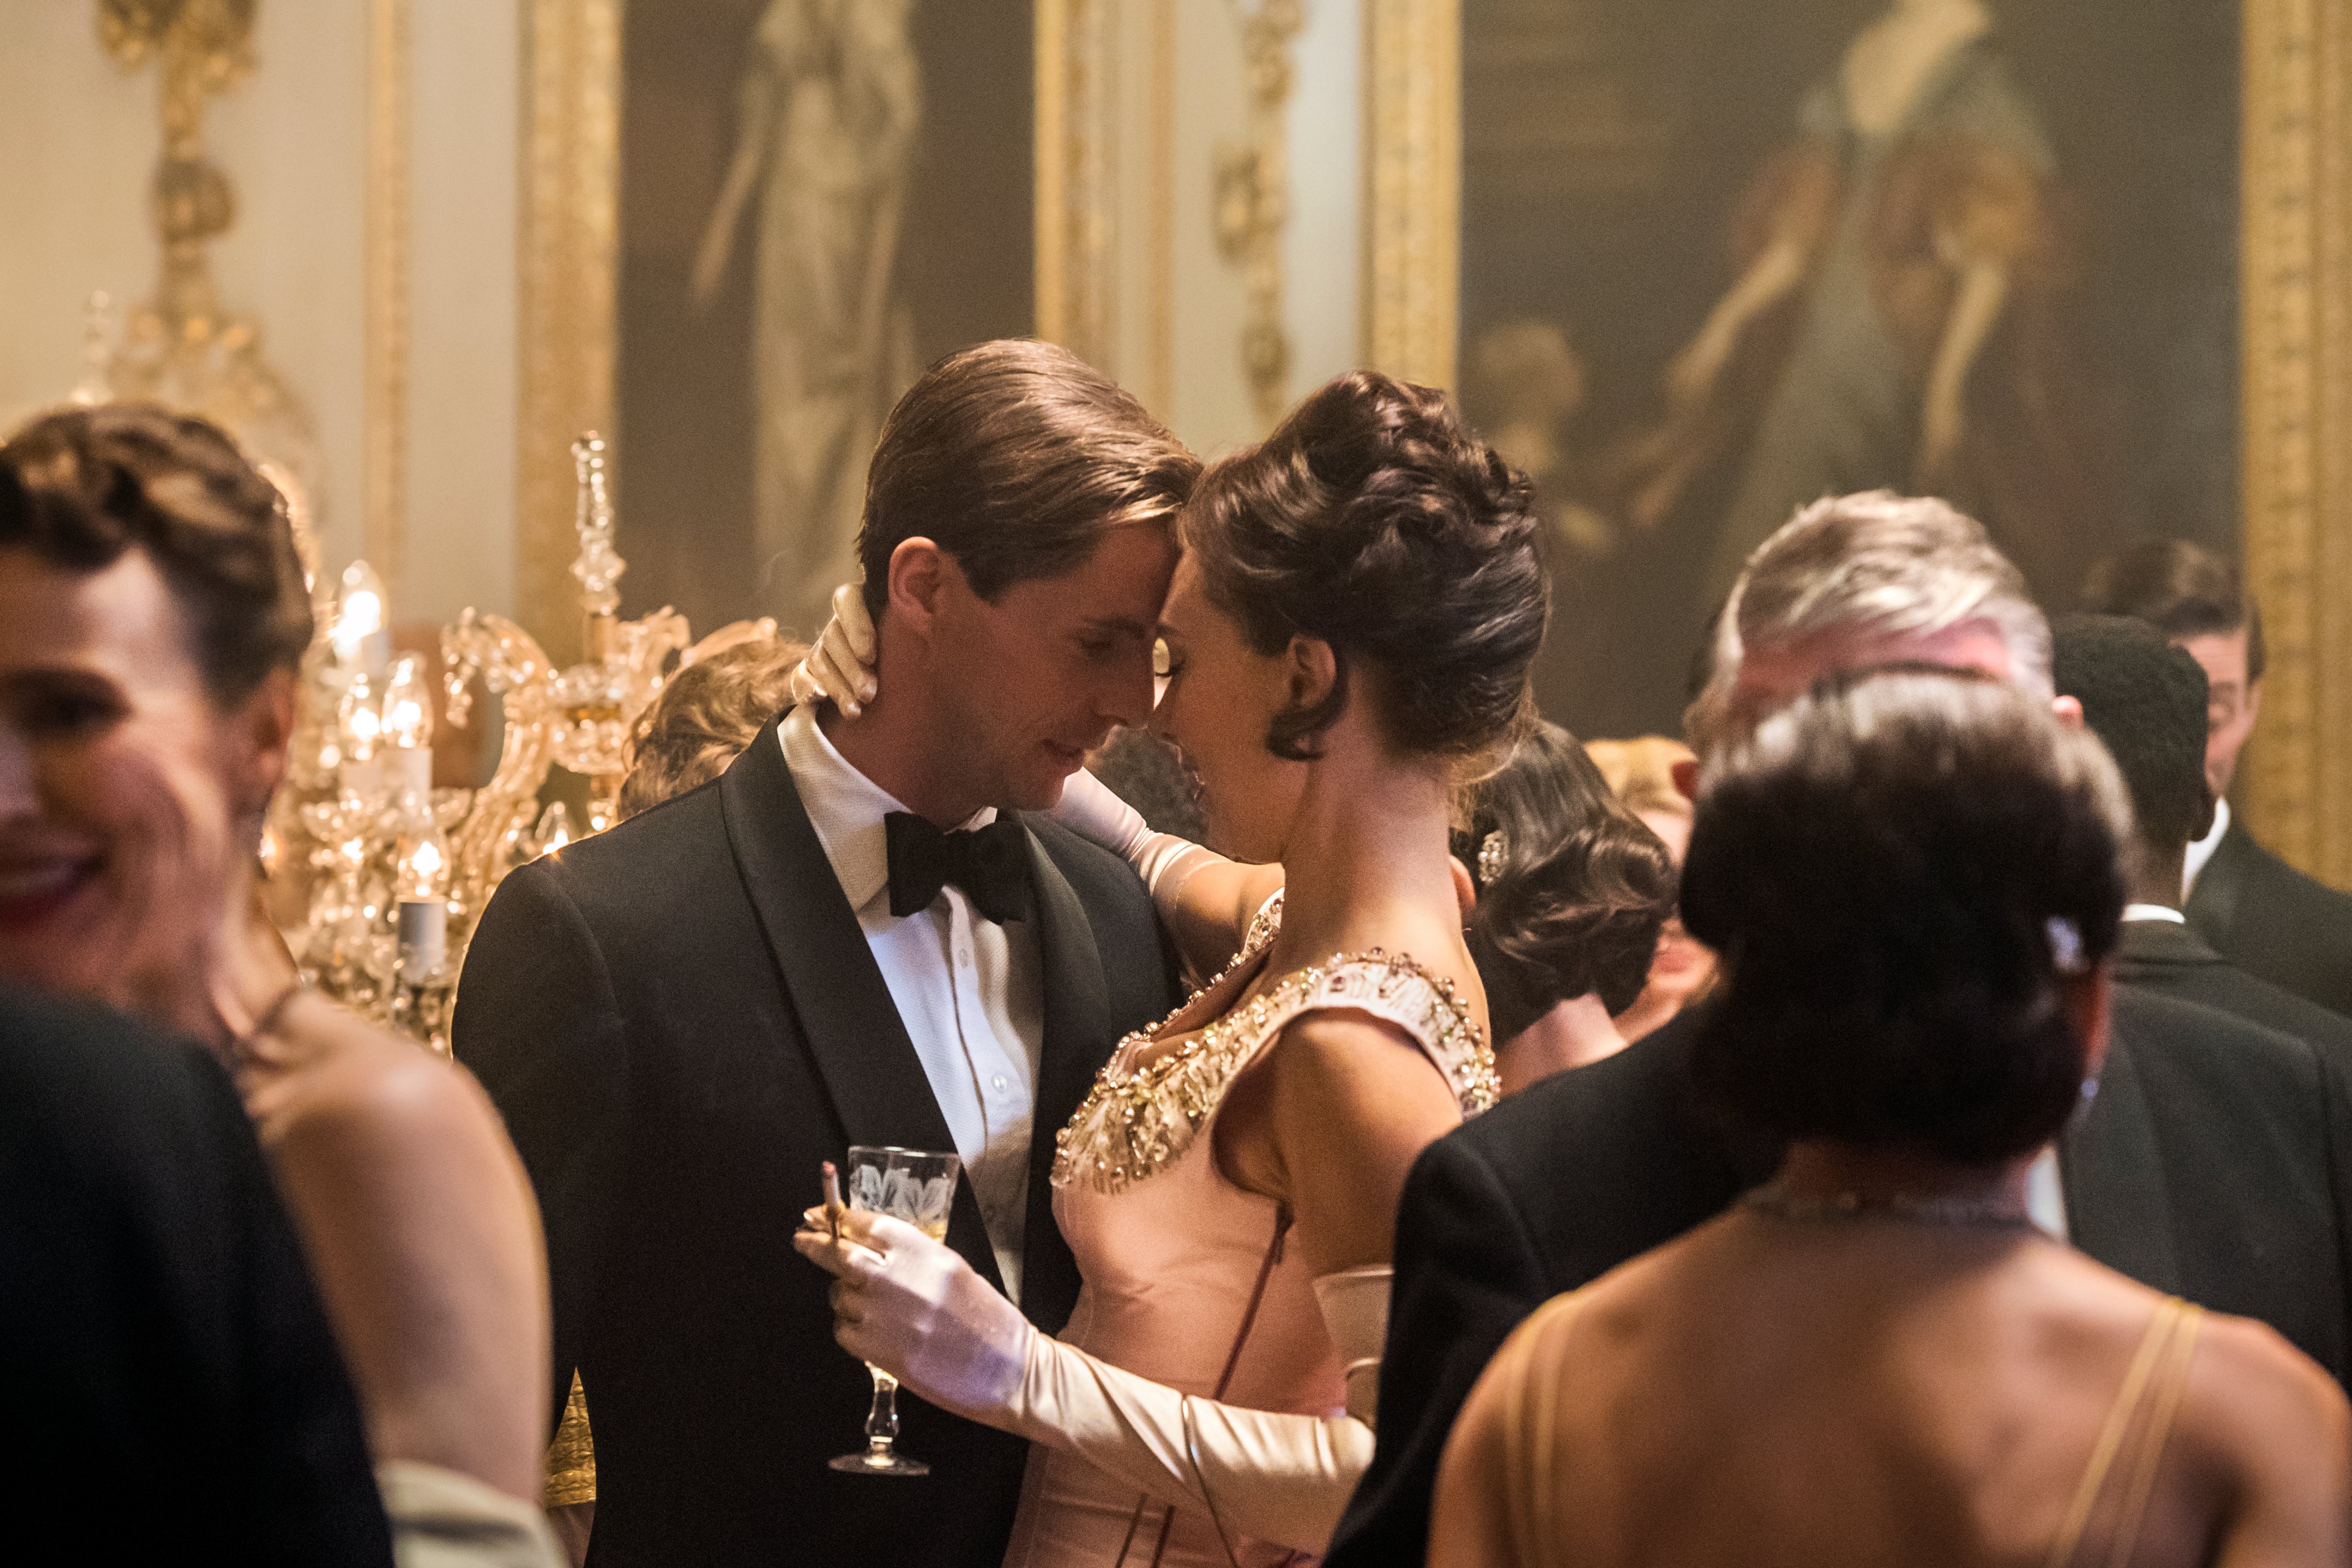 Antony Armstrong-Jones and Princess Margaret share a moment at their engagement party in The Crown. (Alex Bailey / Netflix)